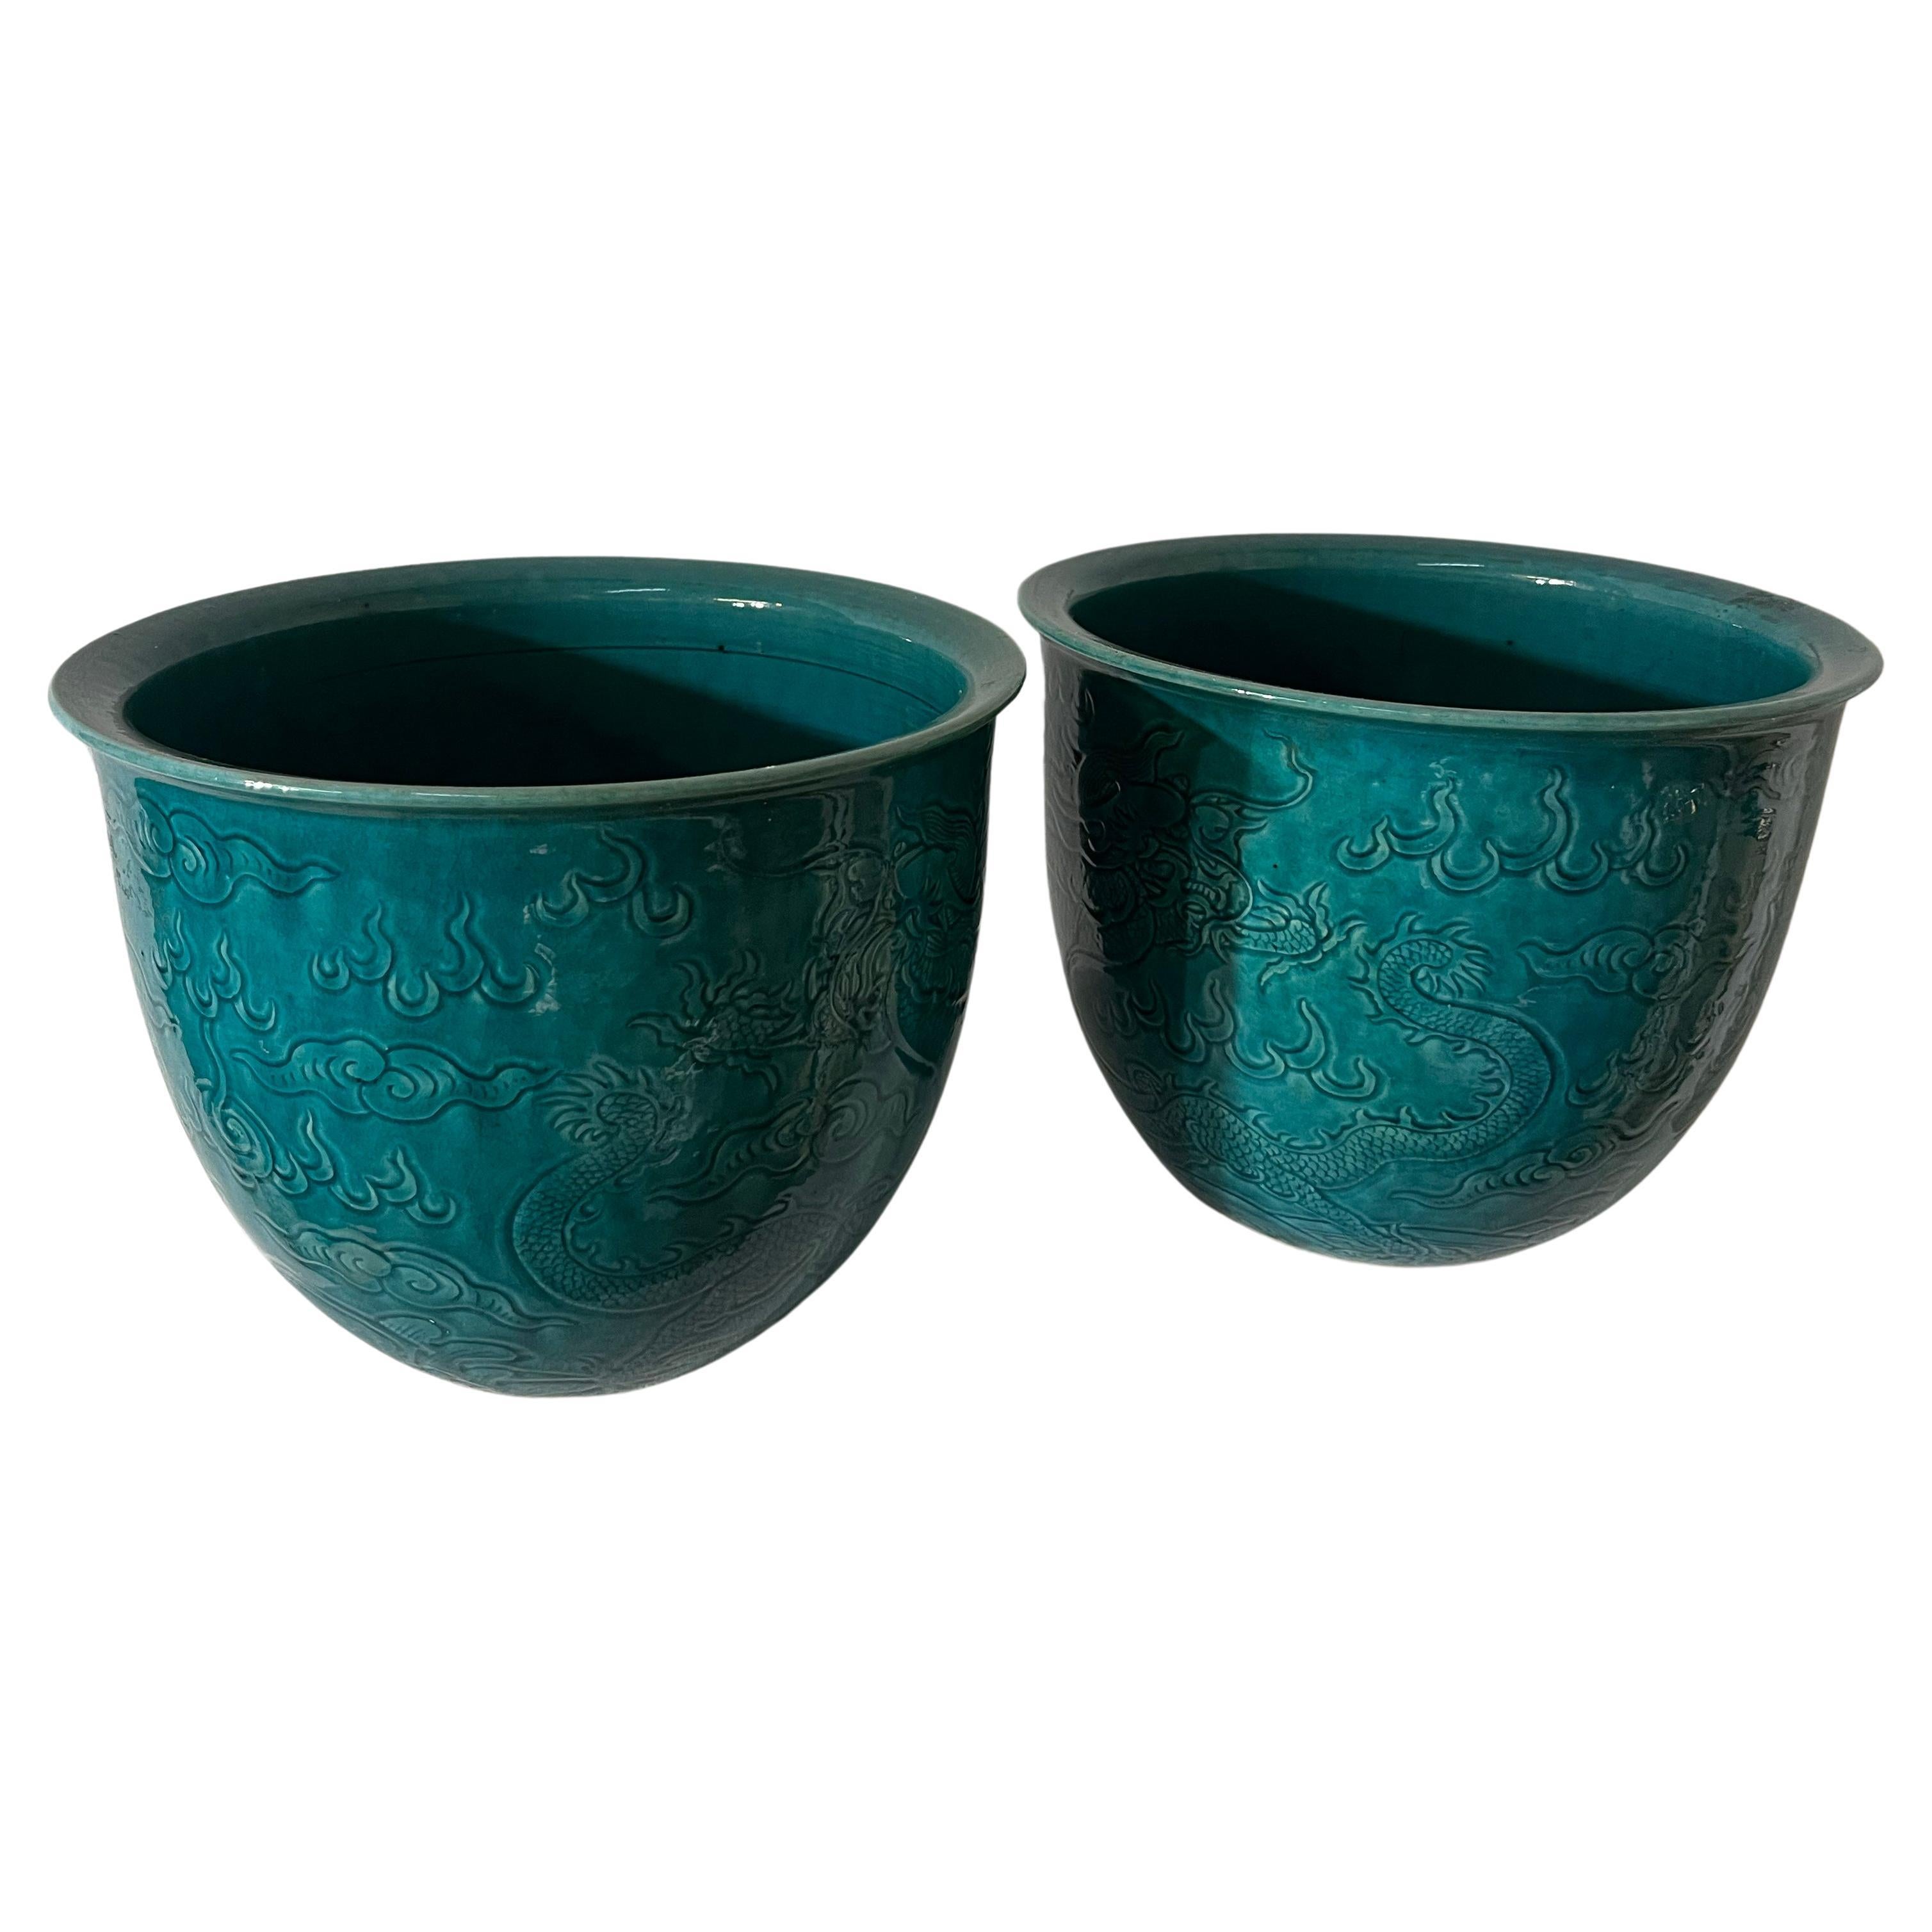 Pair of Antique Chinese 19th cent Turquoise Enameled Ceramic pot holder For Sale